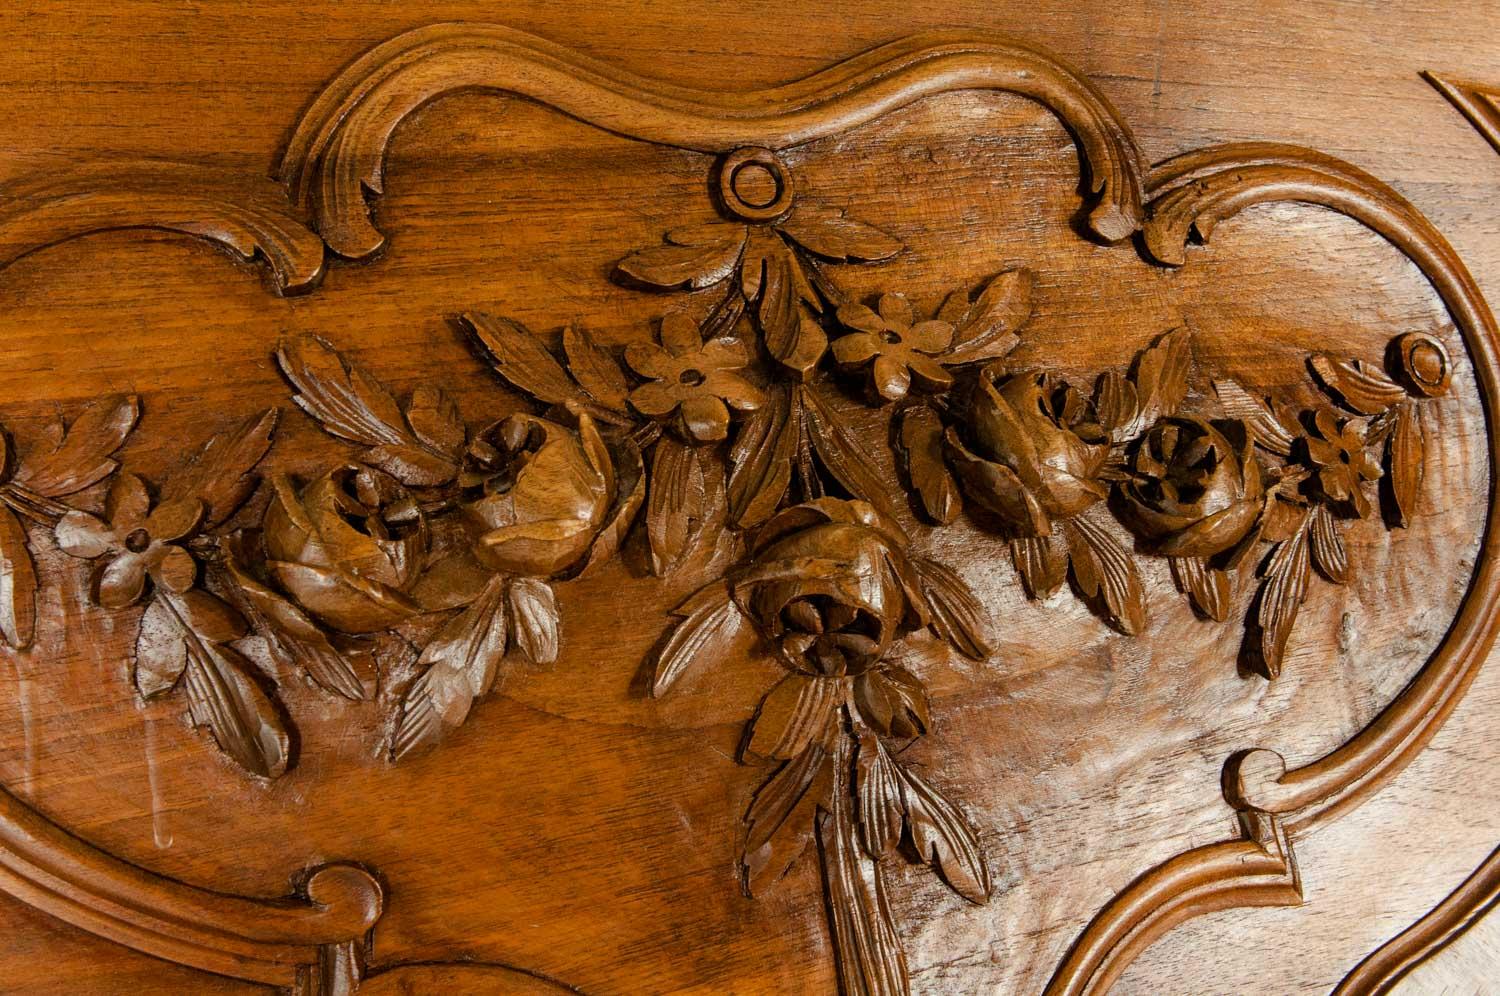 Late 19th Century French Burl Walnut Bed 5